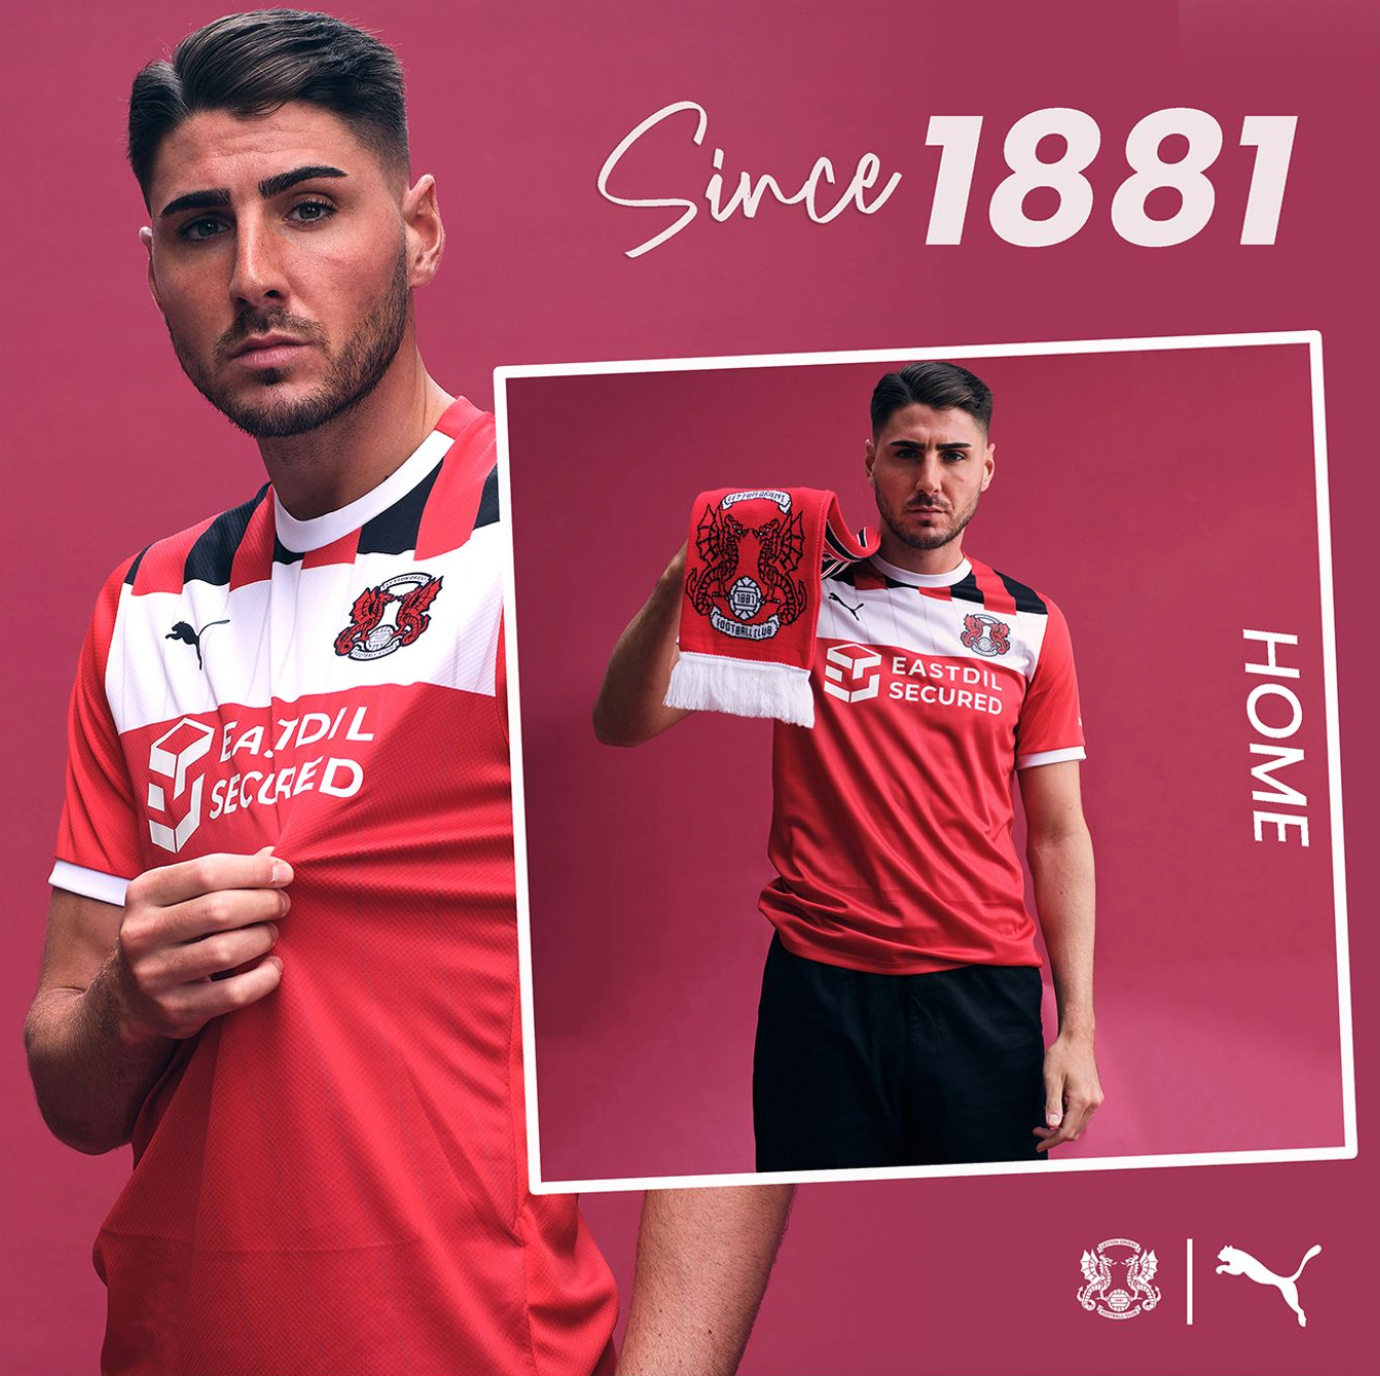 Leyton-orient-football-club-london-new-season-sport-tapestry-soho-frith-street-videography-photography-production-agency-retouching-kit-launch-league-one